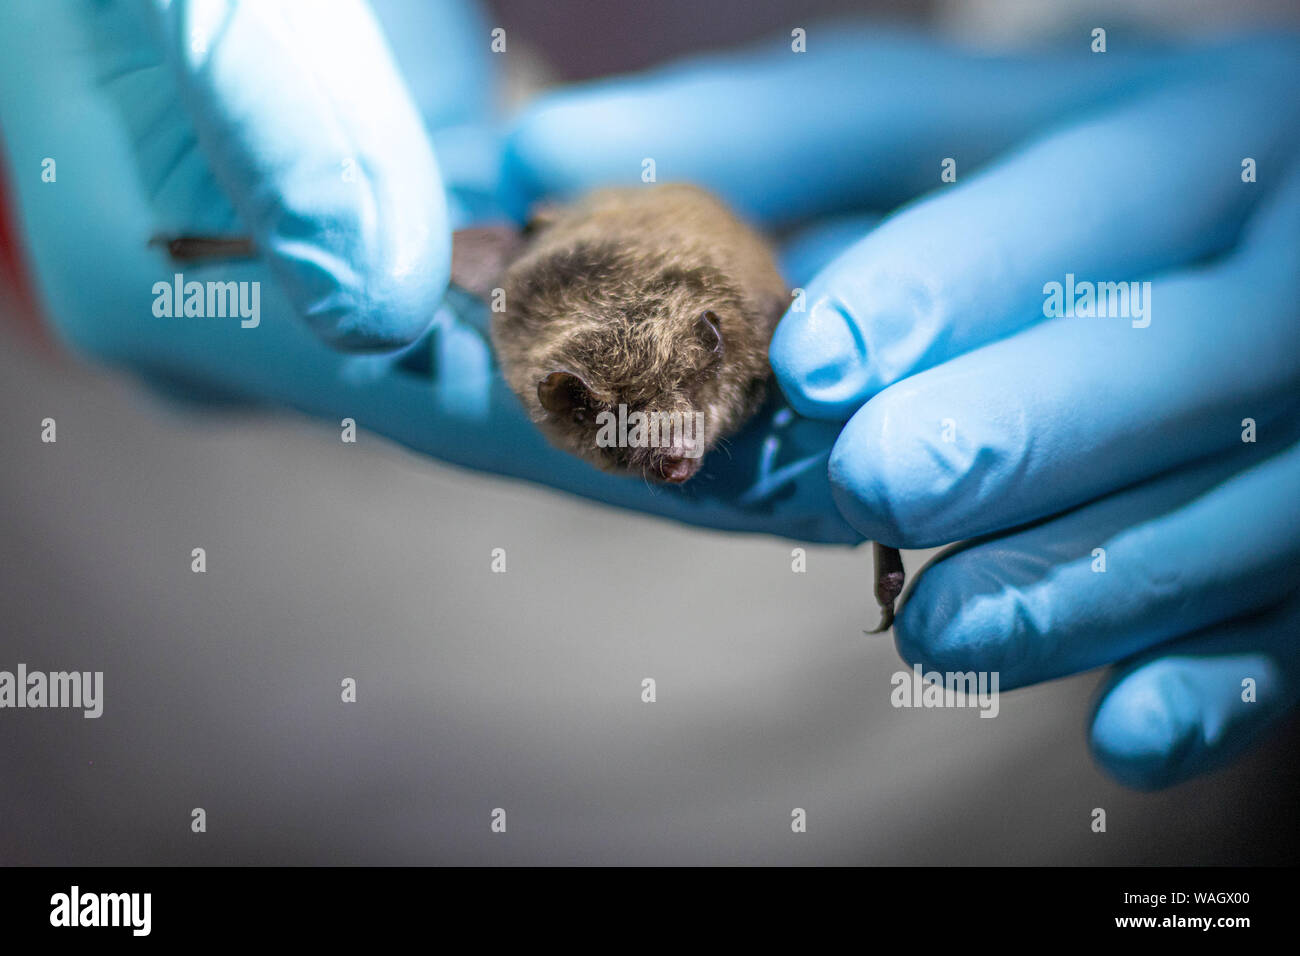 Wildlife researchers carefully collect data from a bat captured via mist net, Northern California. Stock Photo